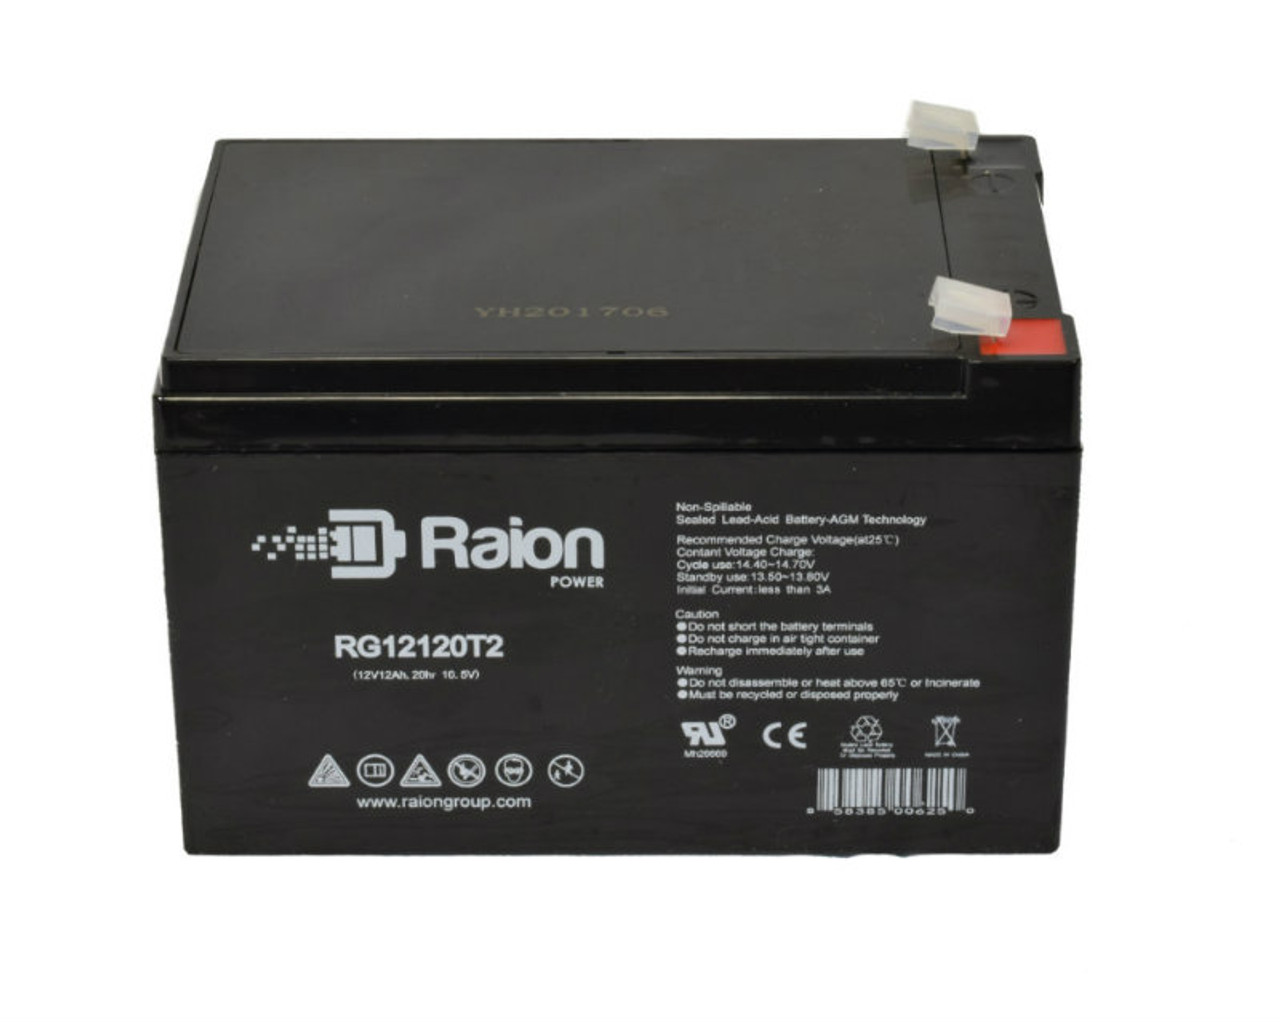 Raion Power RG12120T2 SLA Battery for Merits Health Products _P-321_(1P) Wheelchairs